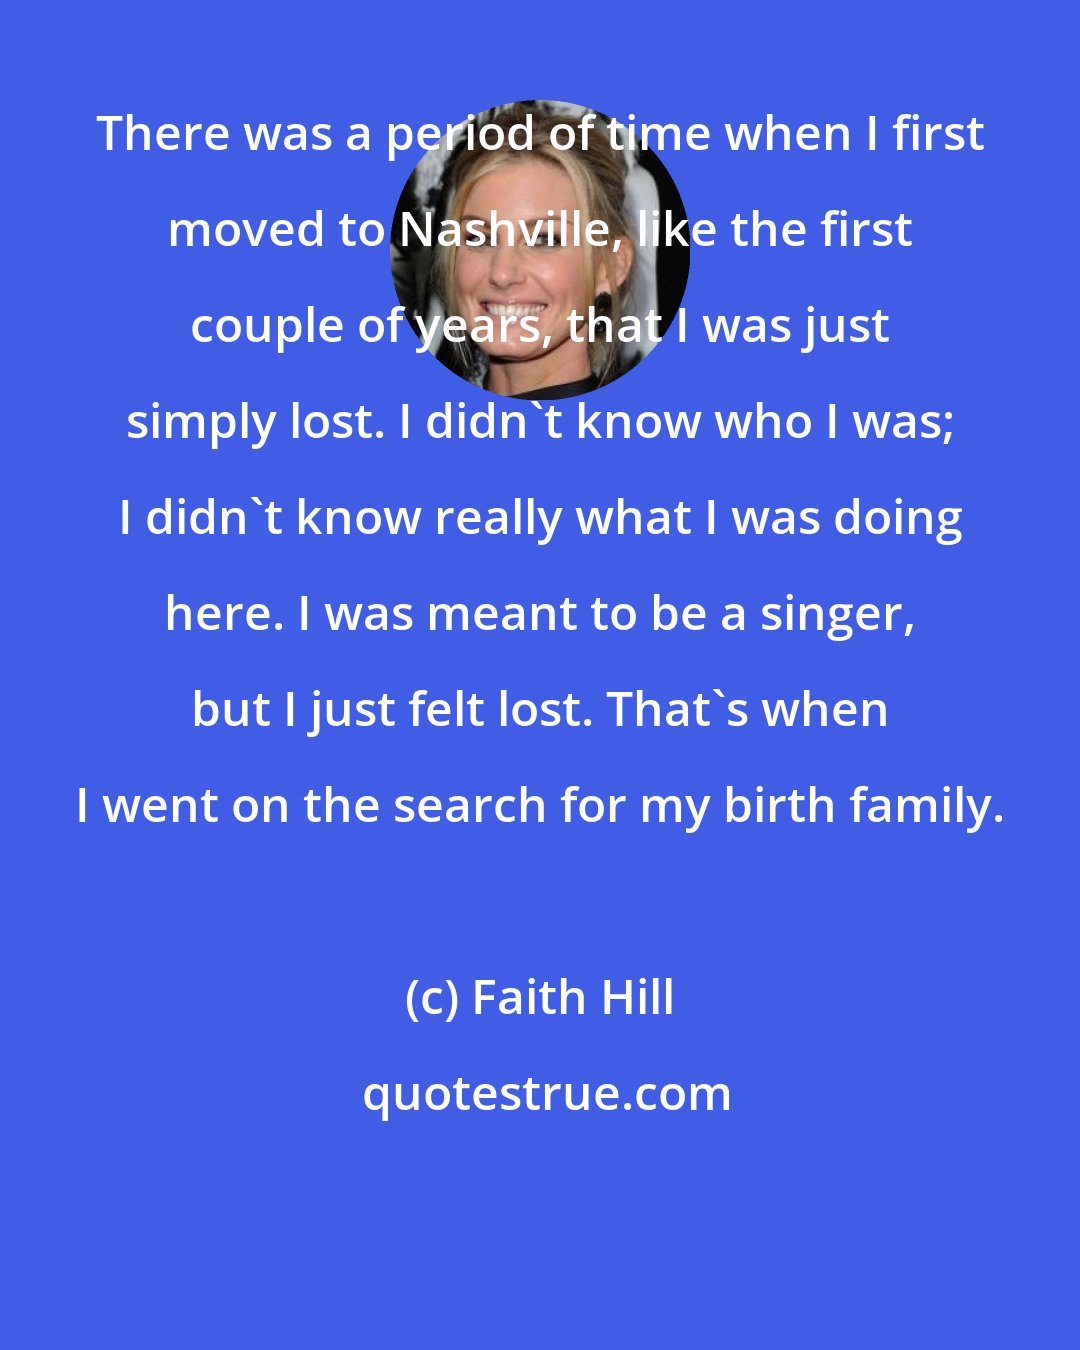 Faith Hill: There was a period of time when I first moved to Nashville, like the first couple of years, that I was just simply lost. I didn't know who I was; I didn't know really what I was doing here. I was meant to be a singer, but I just felt lost. That's when I went on the search for my birth family.